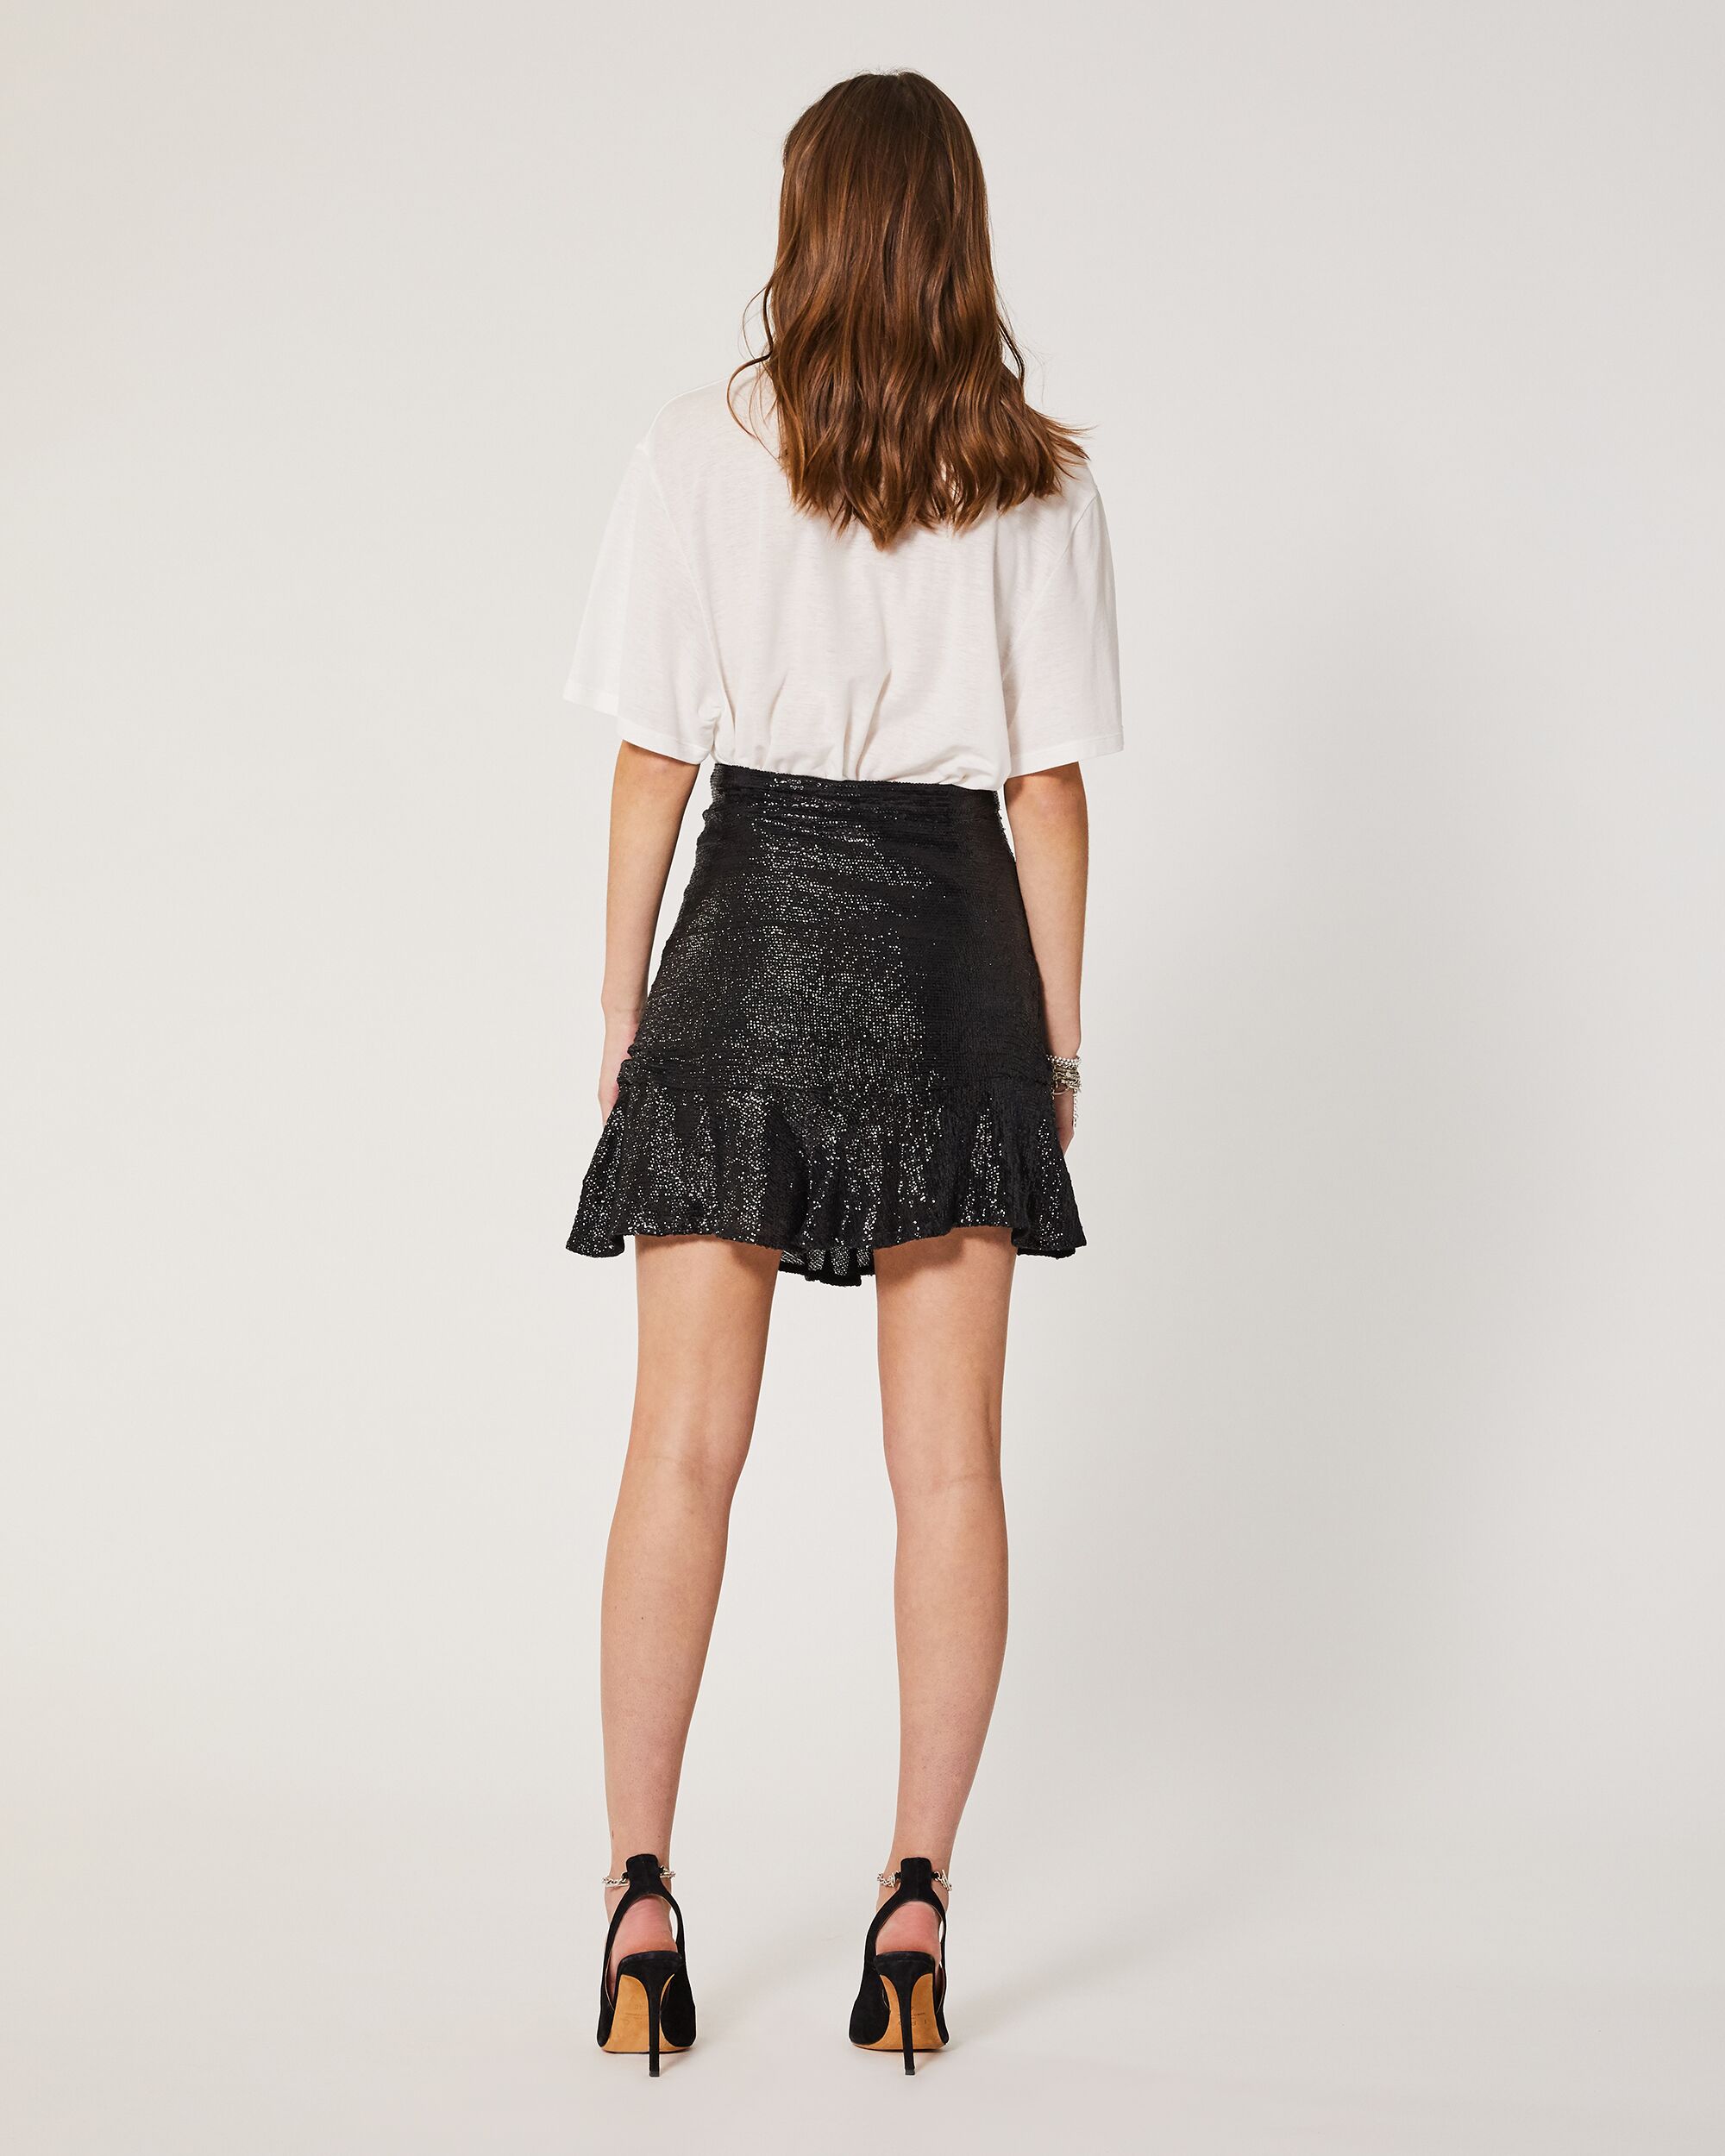 embroidered skirt black top